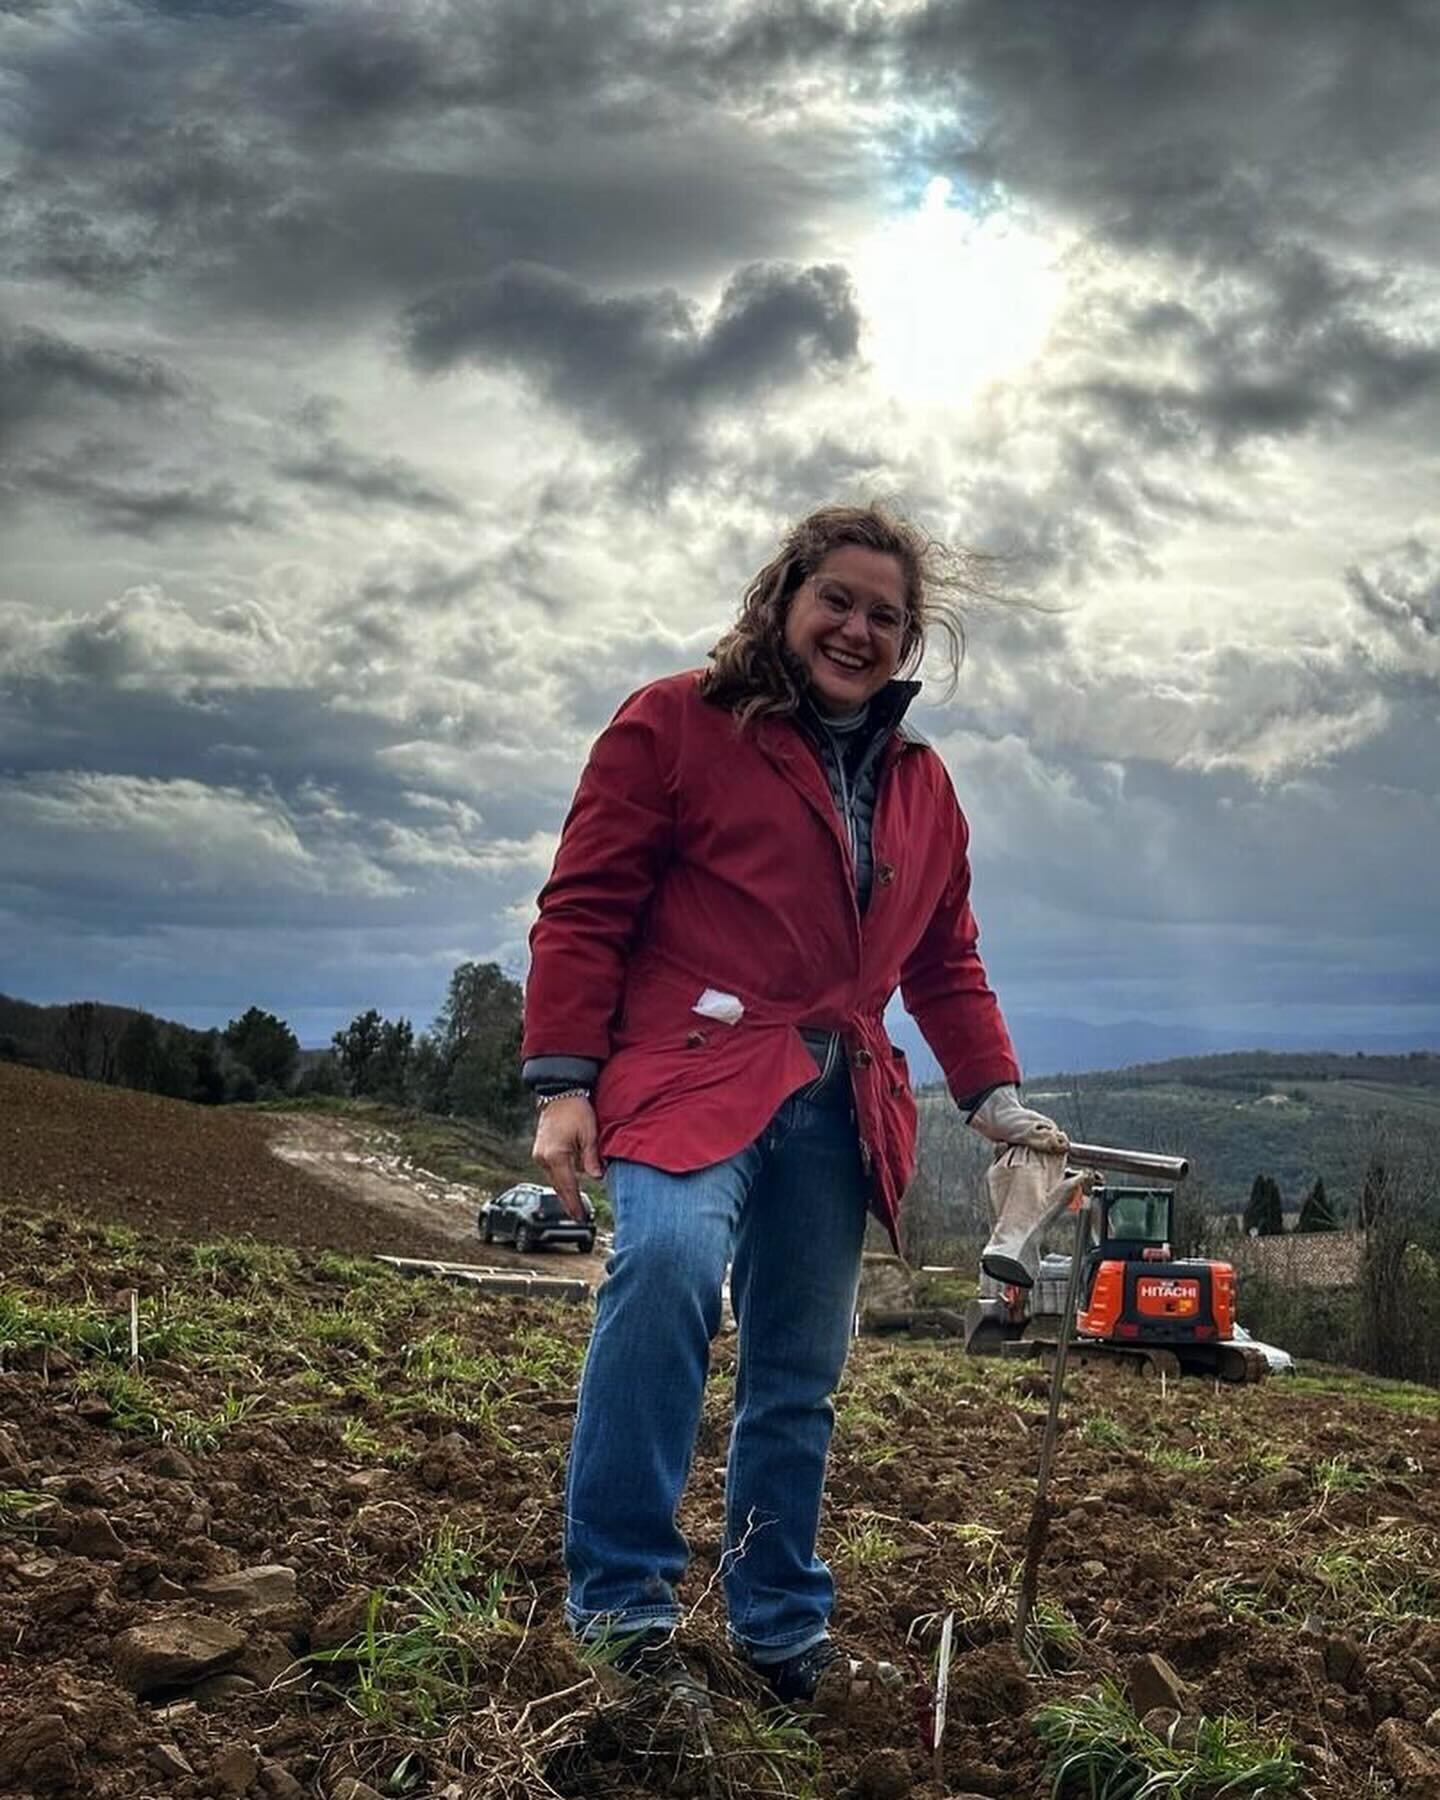 We planted this new vineyard with wisdom and knowledge but it still requires a leap of faith. It will take years and a lot of dedication before it will produce its first Brunello. But the most beautiful things indeed require time, patience and commit